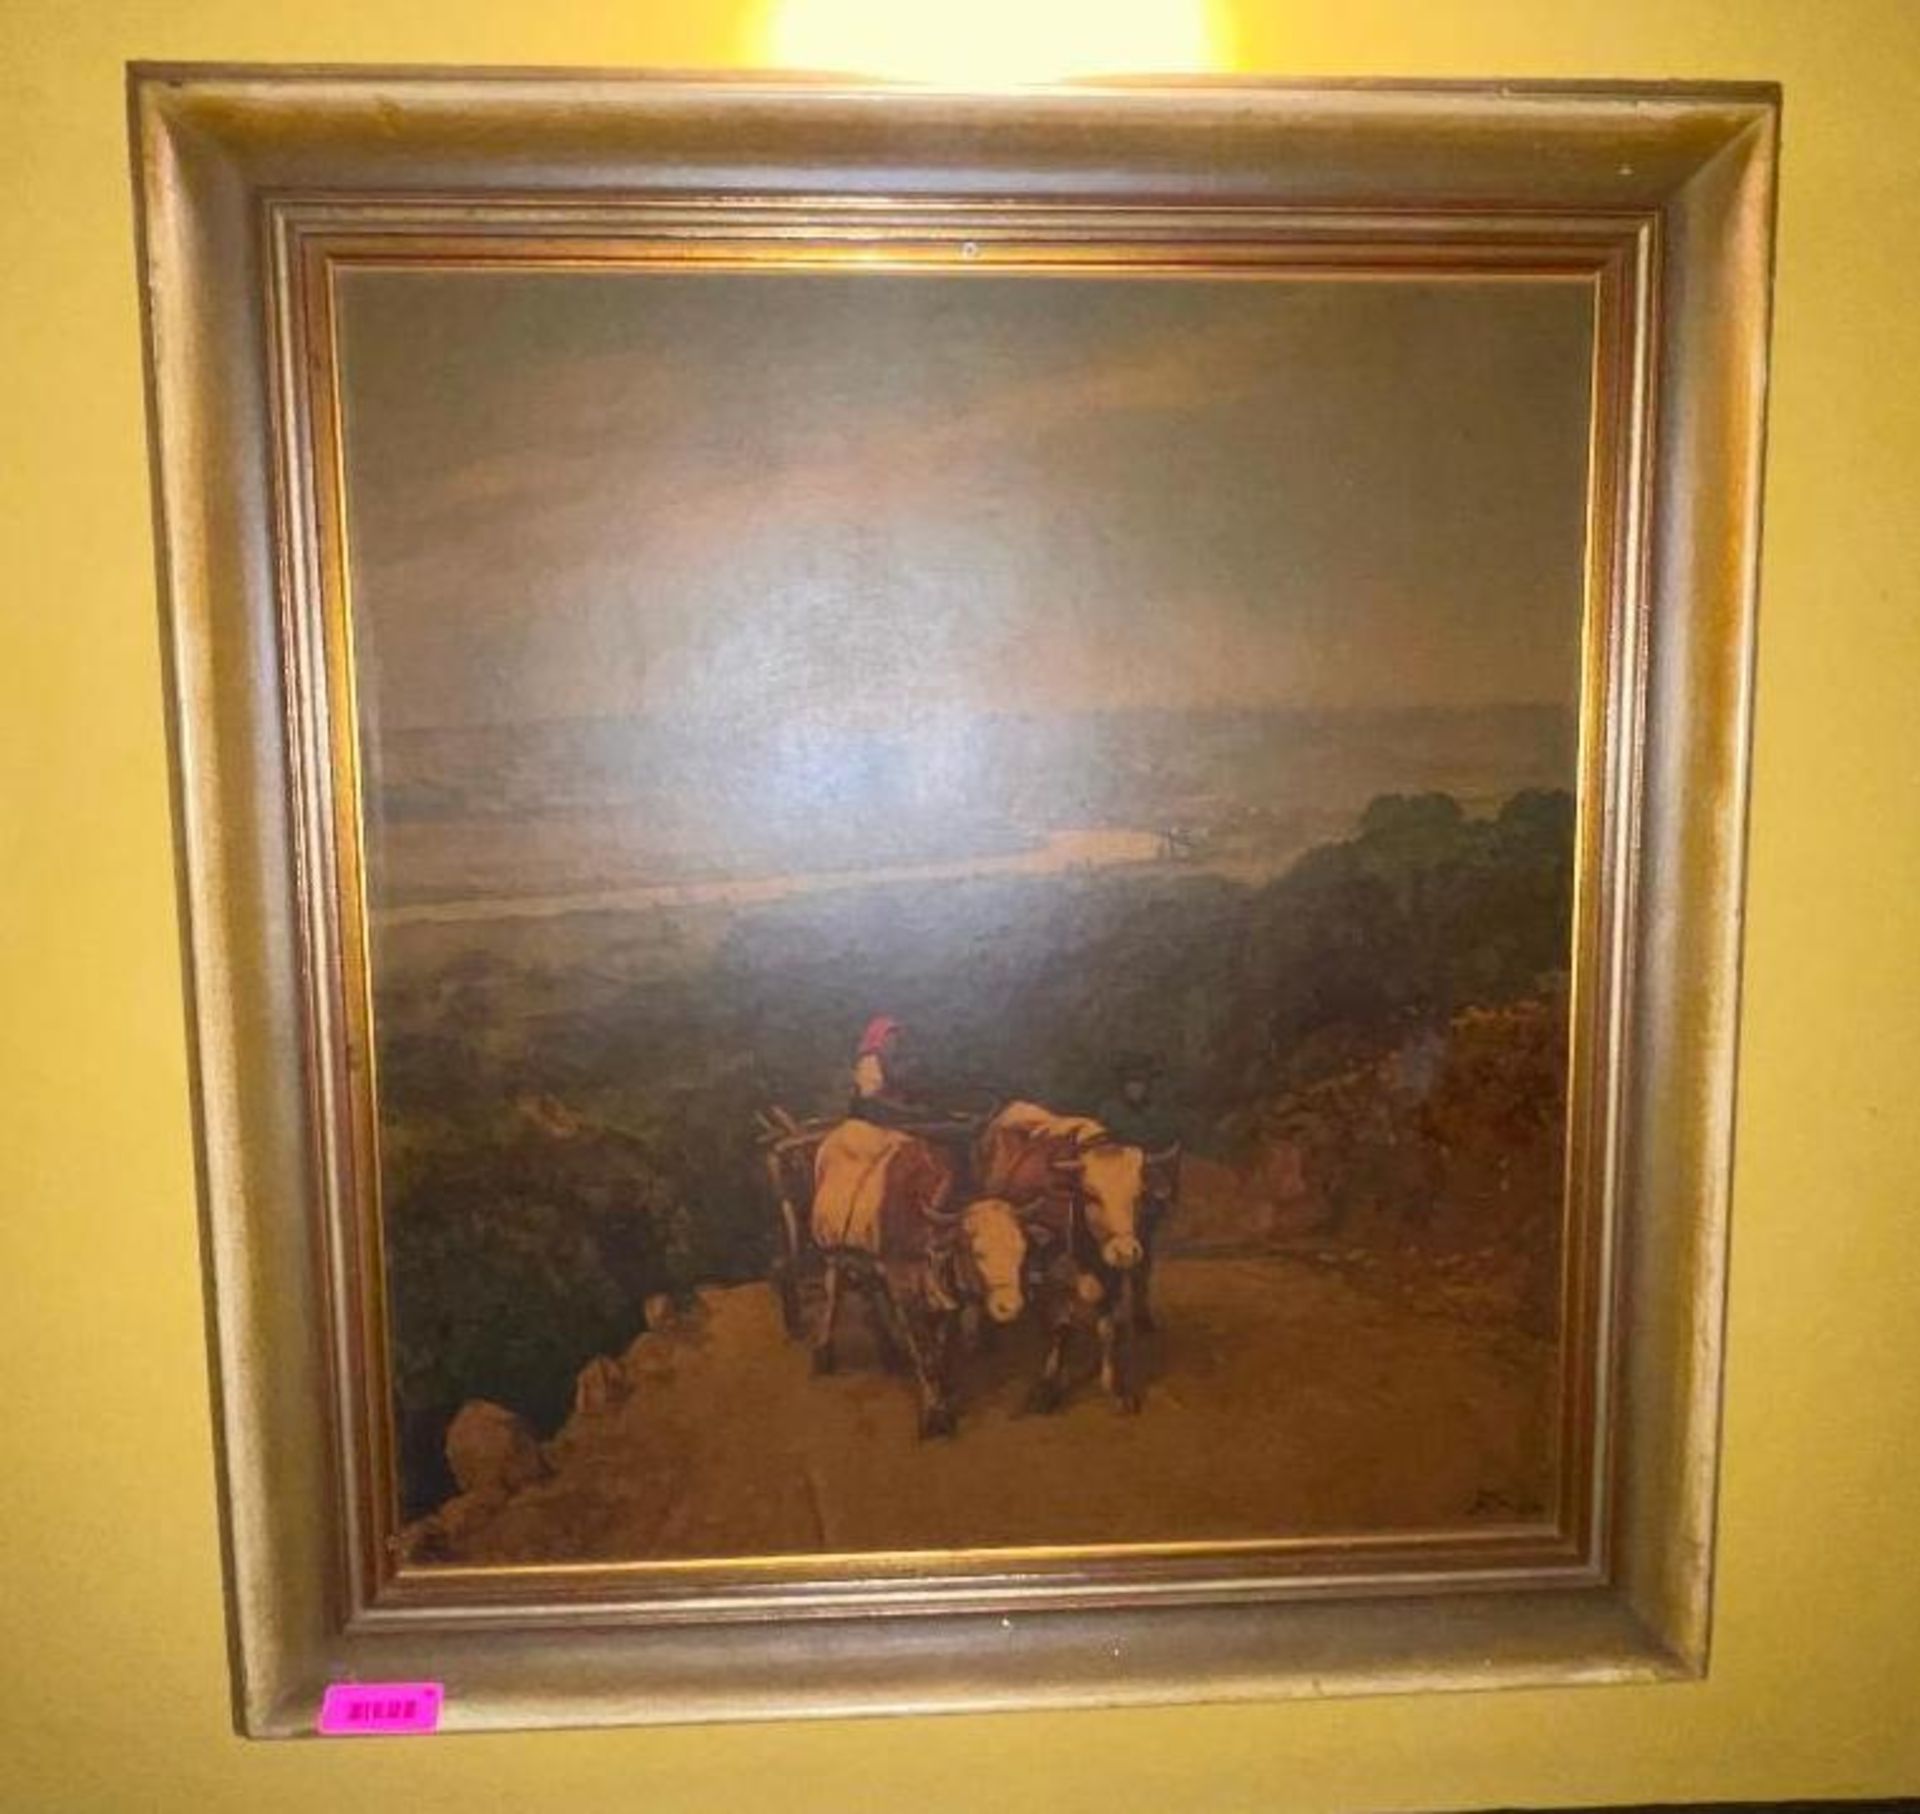 DESCRIPTION: FRAMED PRINT FROM 1986 LOCATION: SEATING QTY: 1